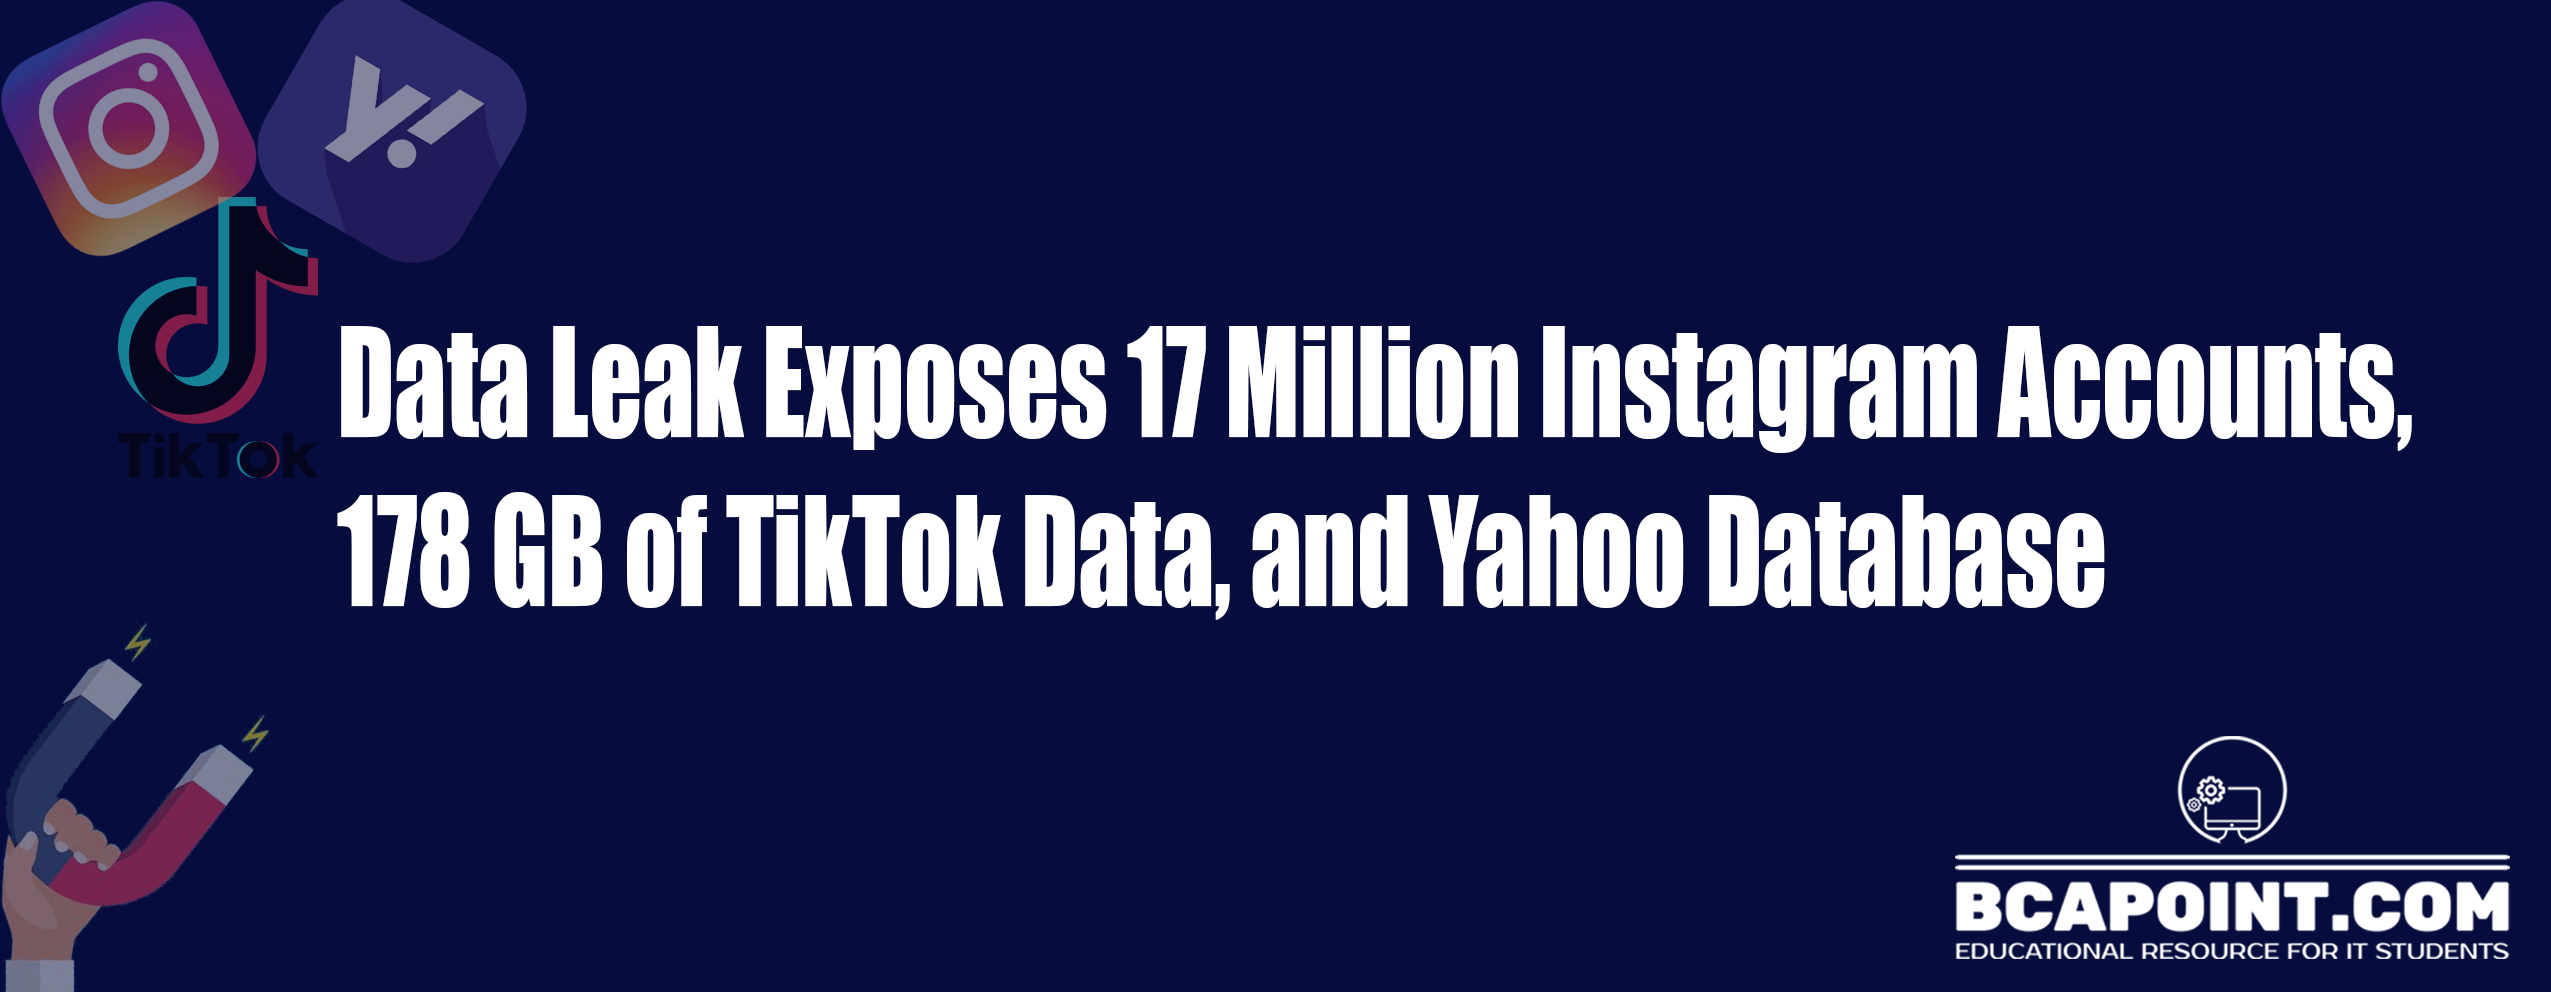 You are currently viewing Instagram Data Leak Exposes 17 Million Accounts, 178 GB in TikTok Data Leak, and Yahoo Databases